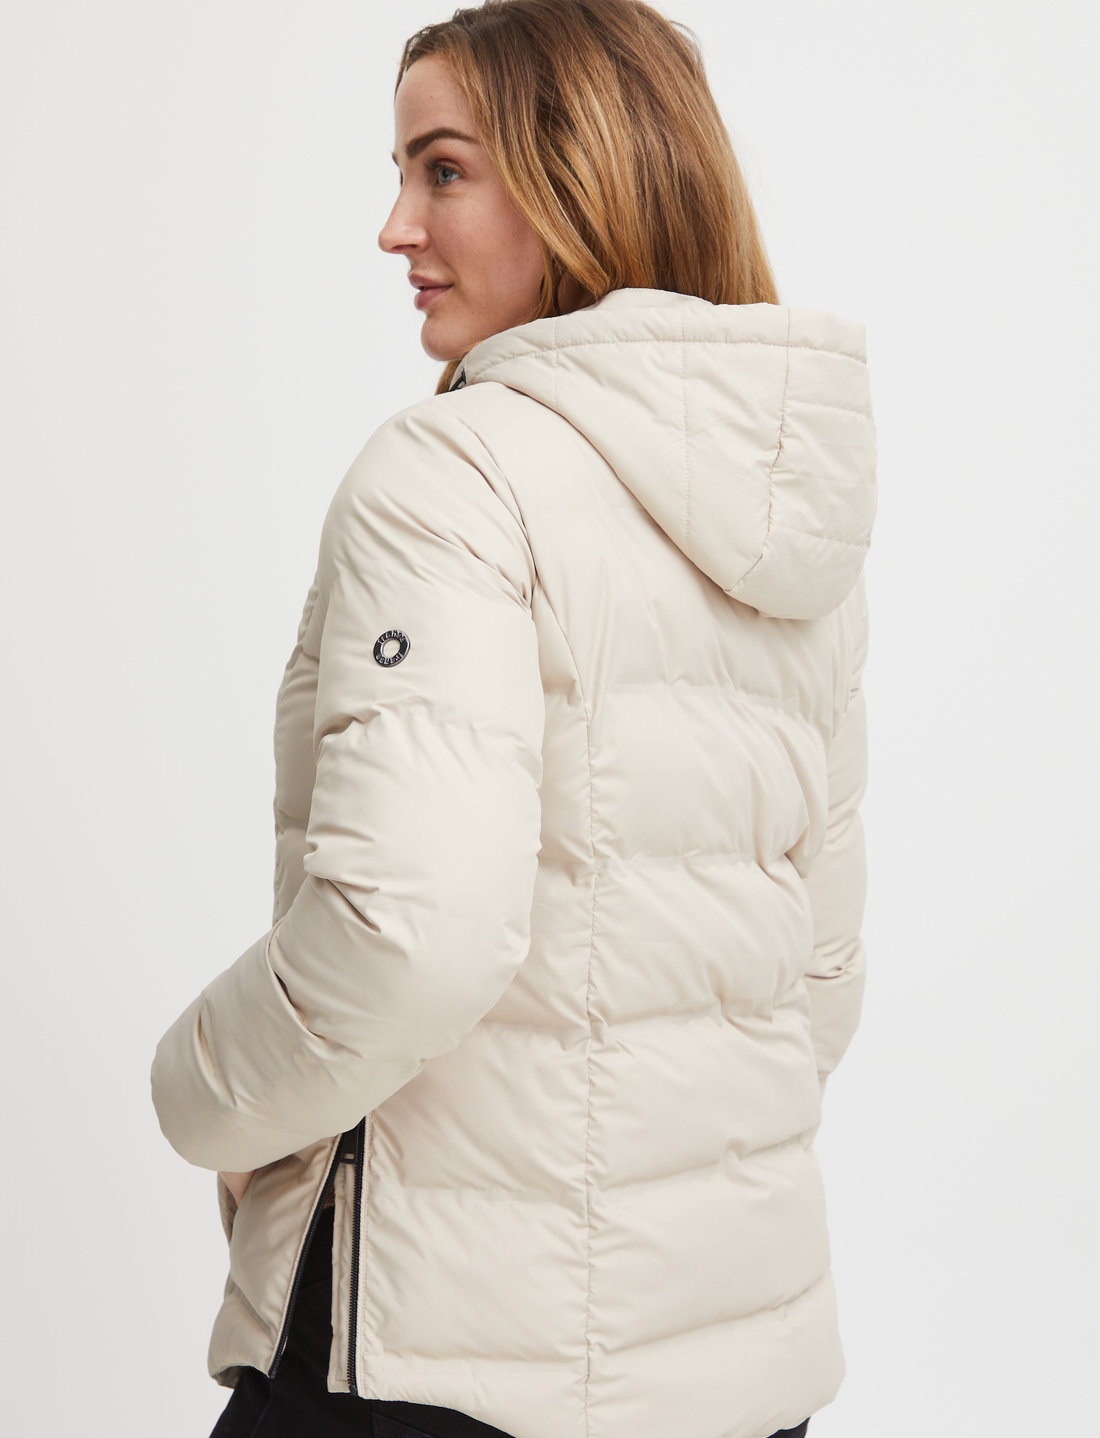 Fransa Frbafab Ja 1 - 60 €. Buy Down- & padded jackets from Fransa online  at Boozt.com. Fast delivery and easy returns